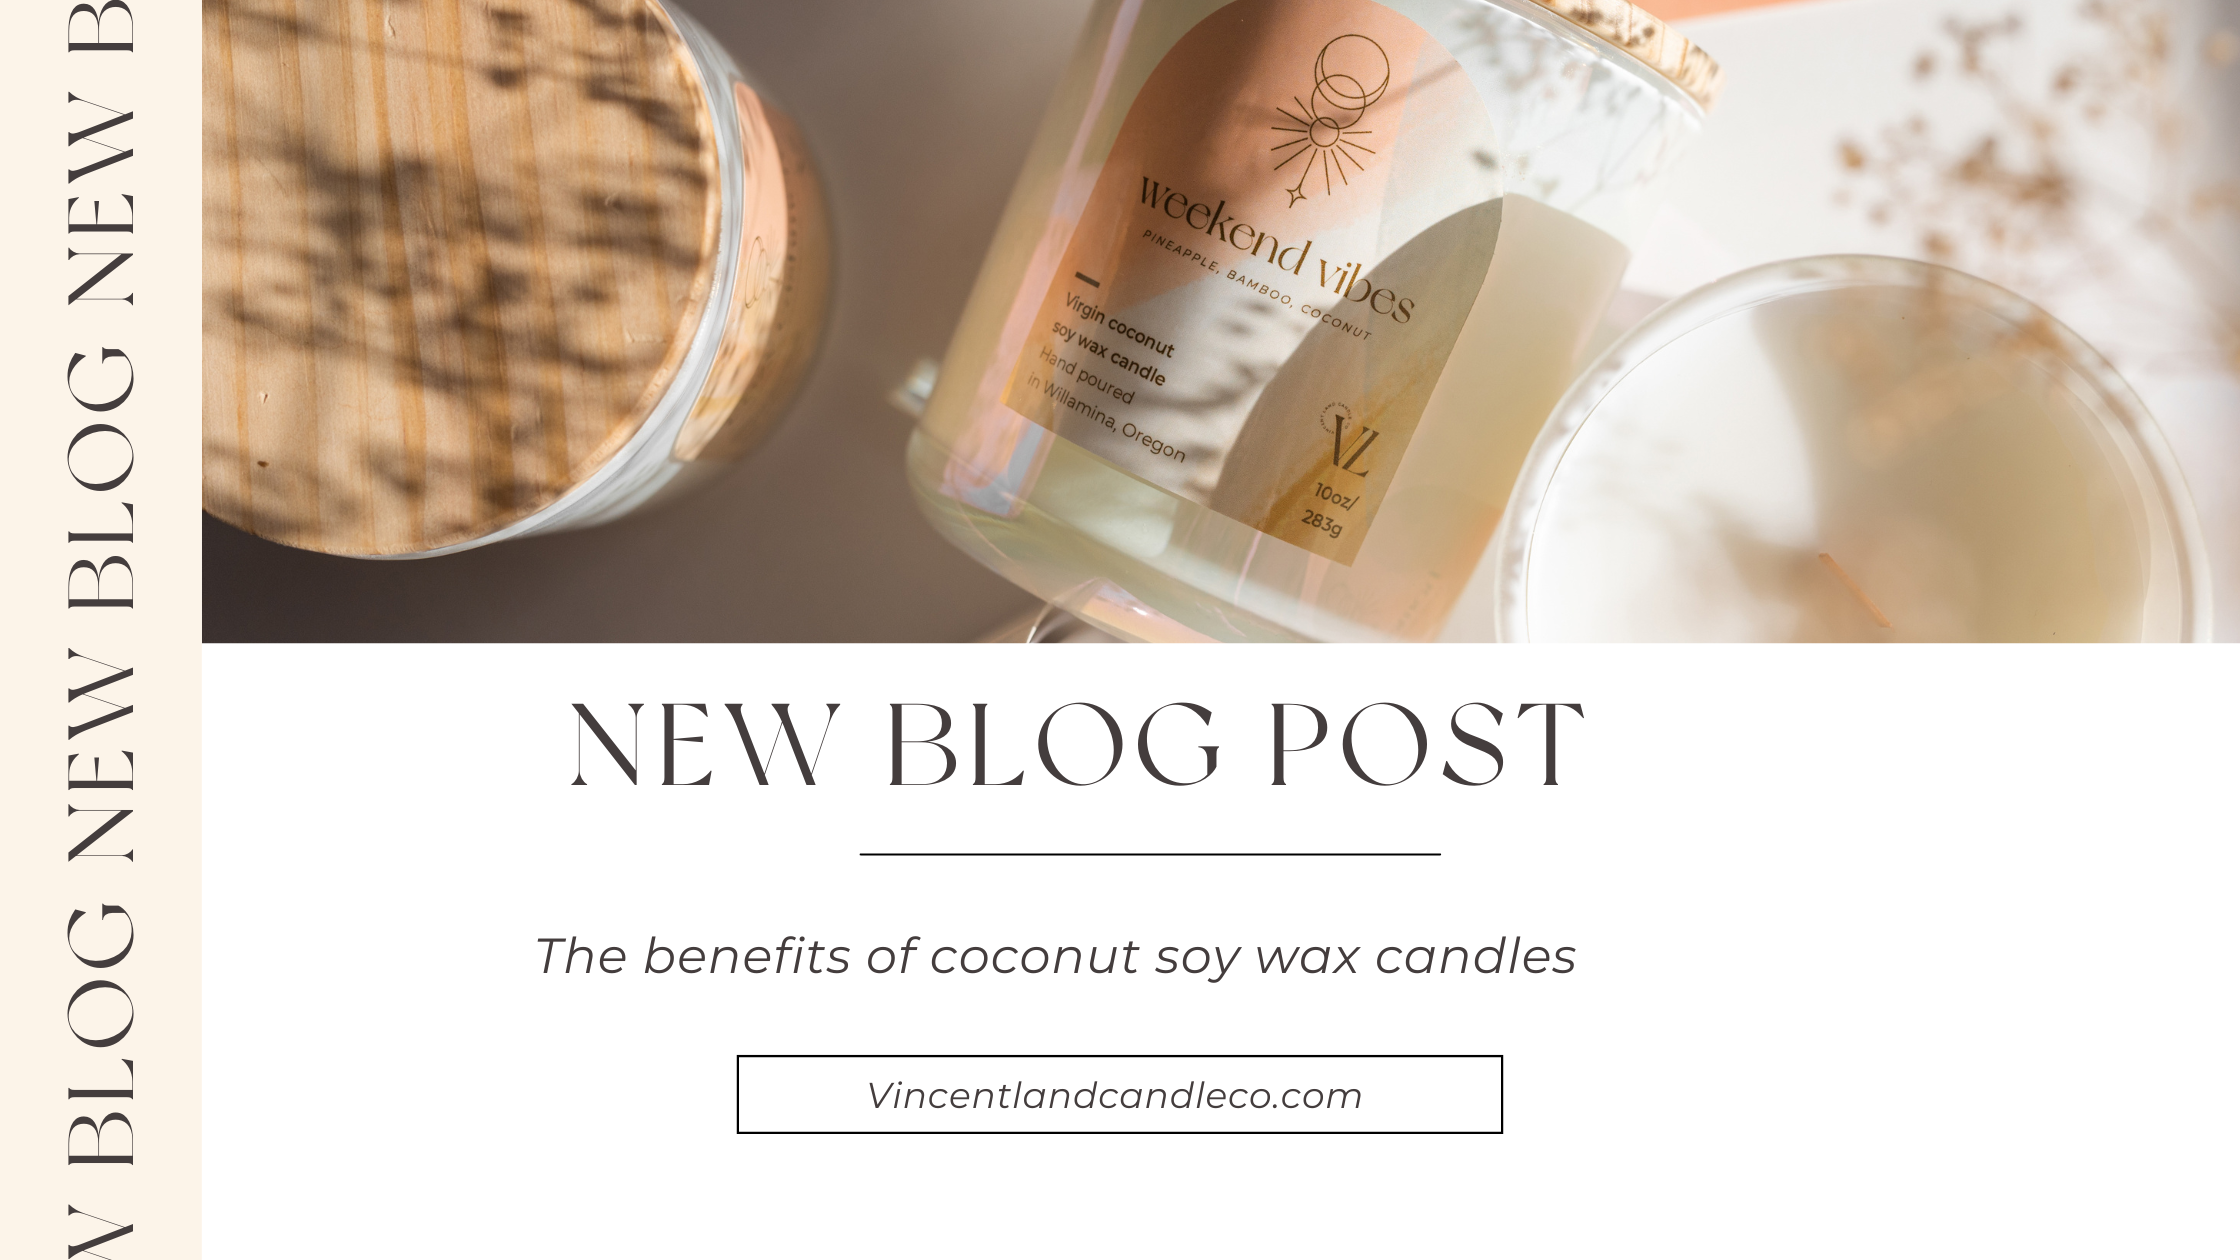 Coconut Wax in Candle Making: Benefits and Uses - artful glow